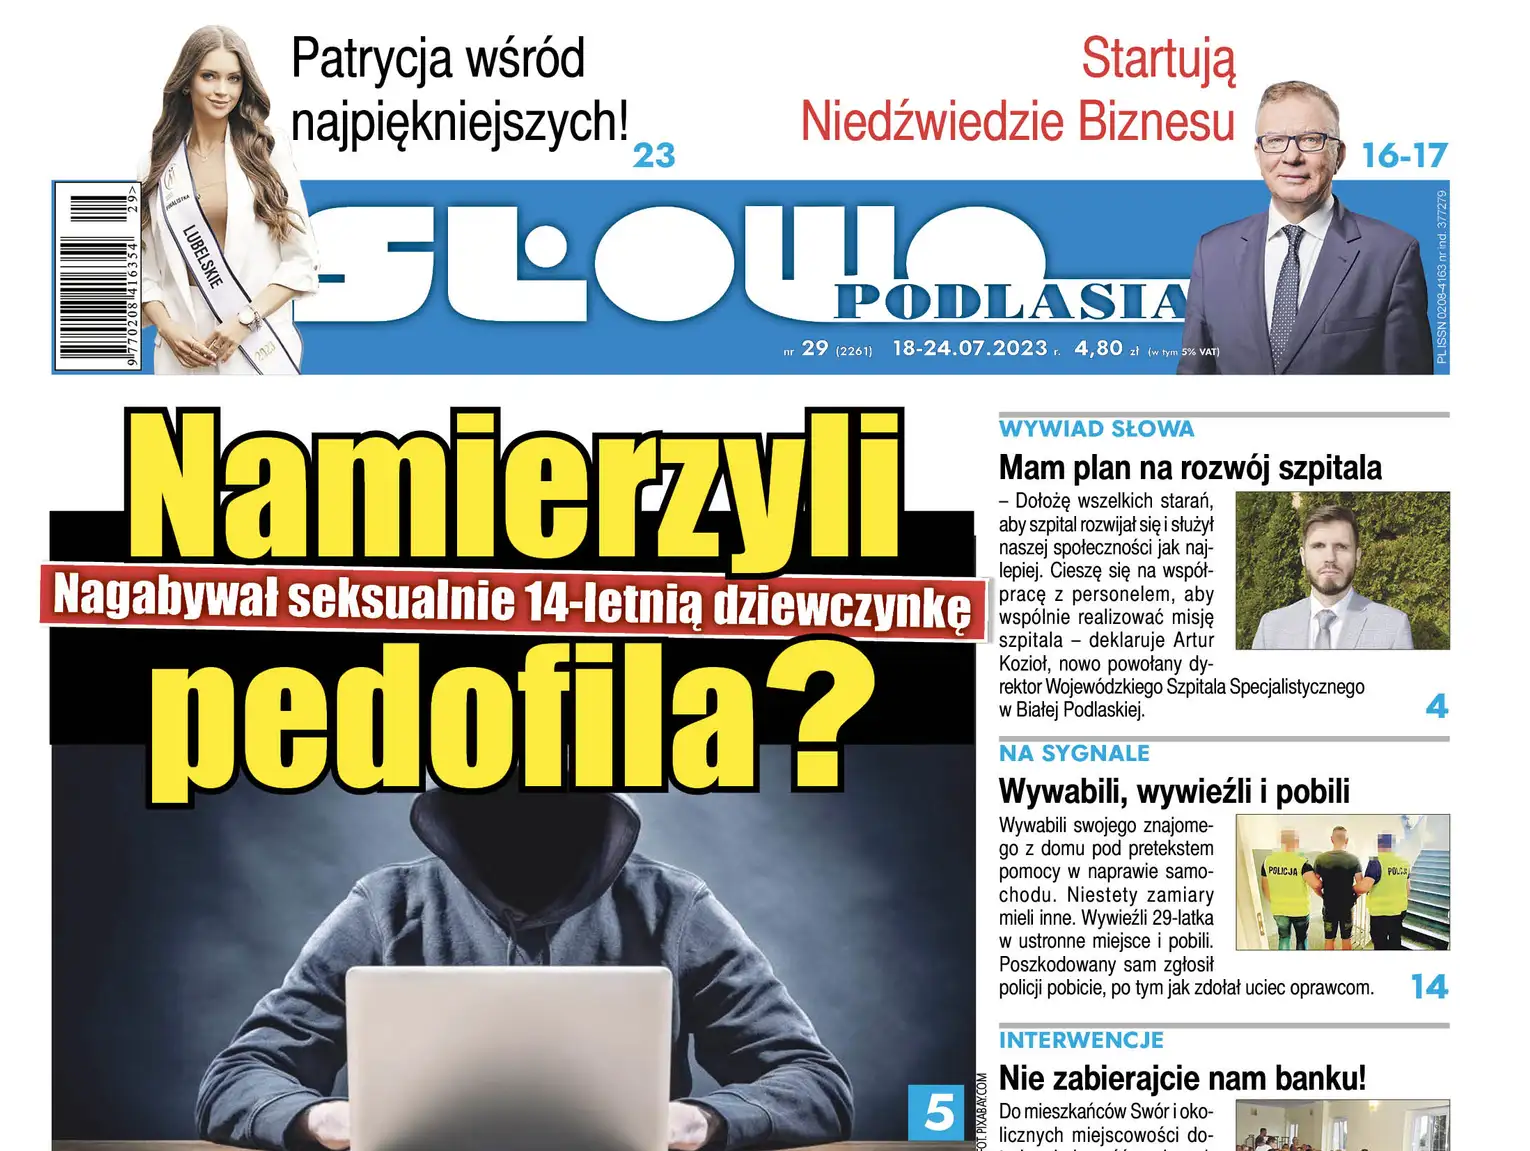 The new edition of Słowa Podlasie is ready!  Check what we wrote